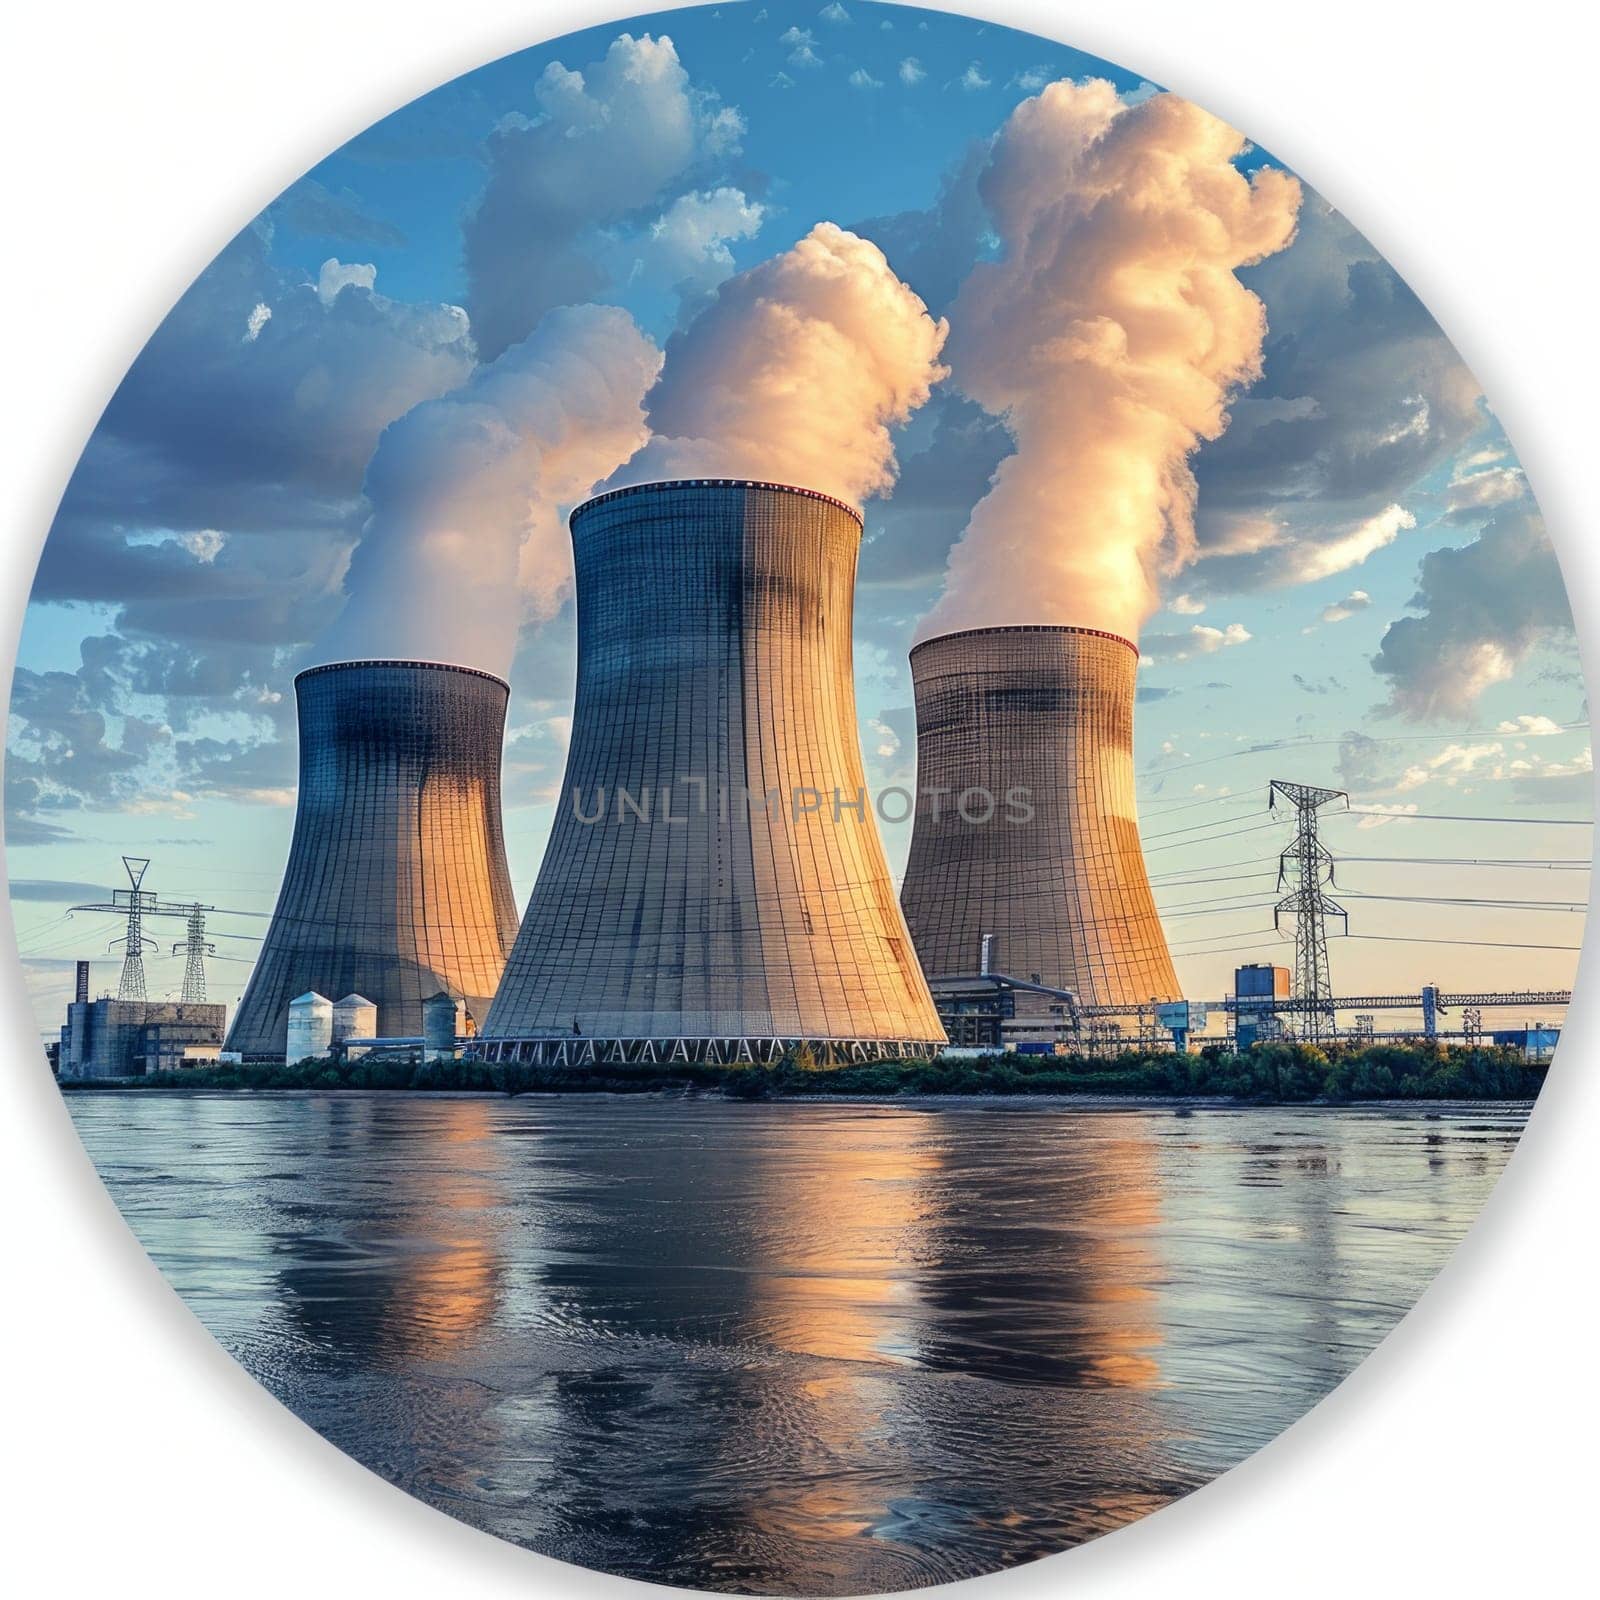 Circled photo of three large power plants are spewing smoke into the air isolated on white background.